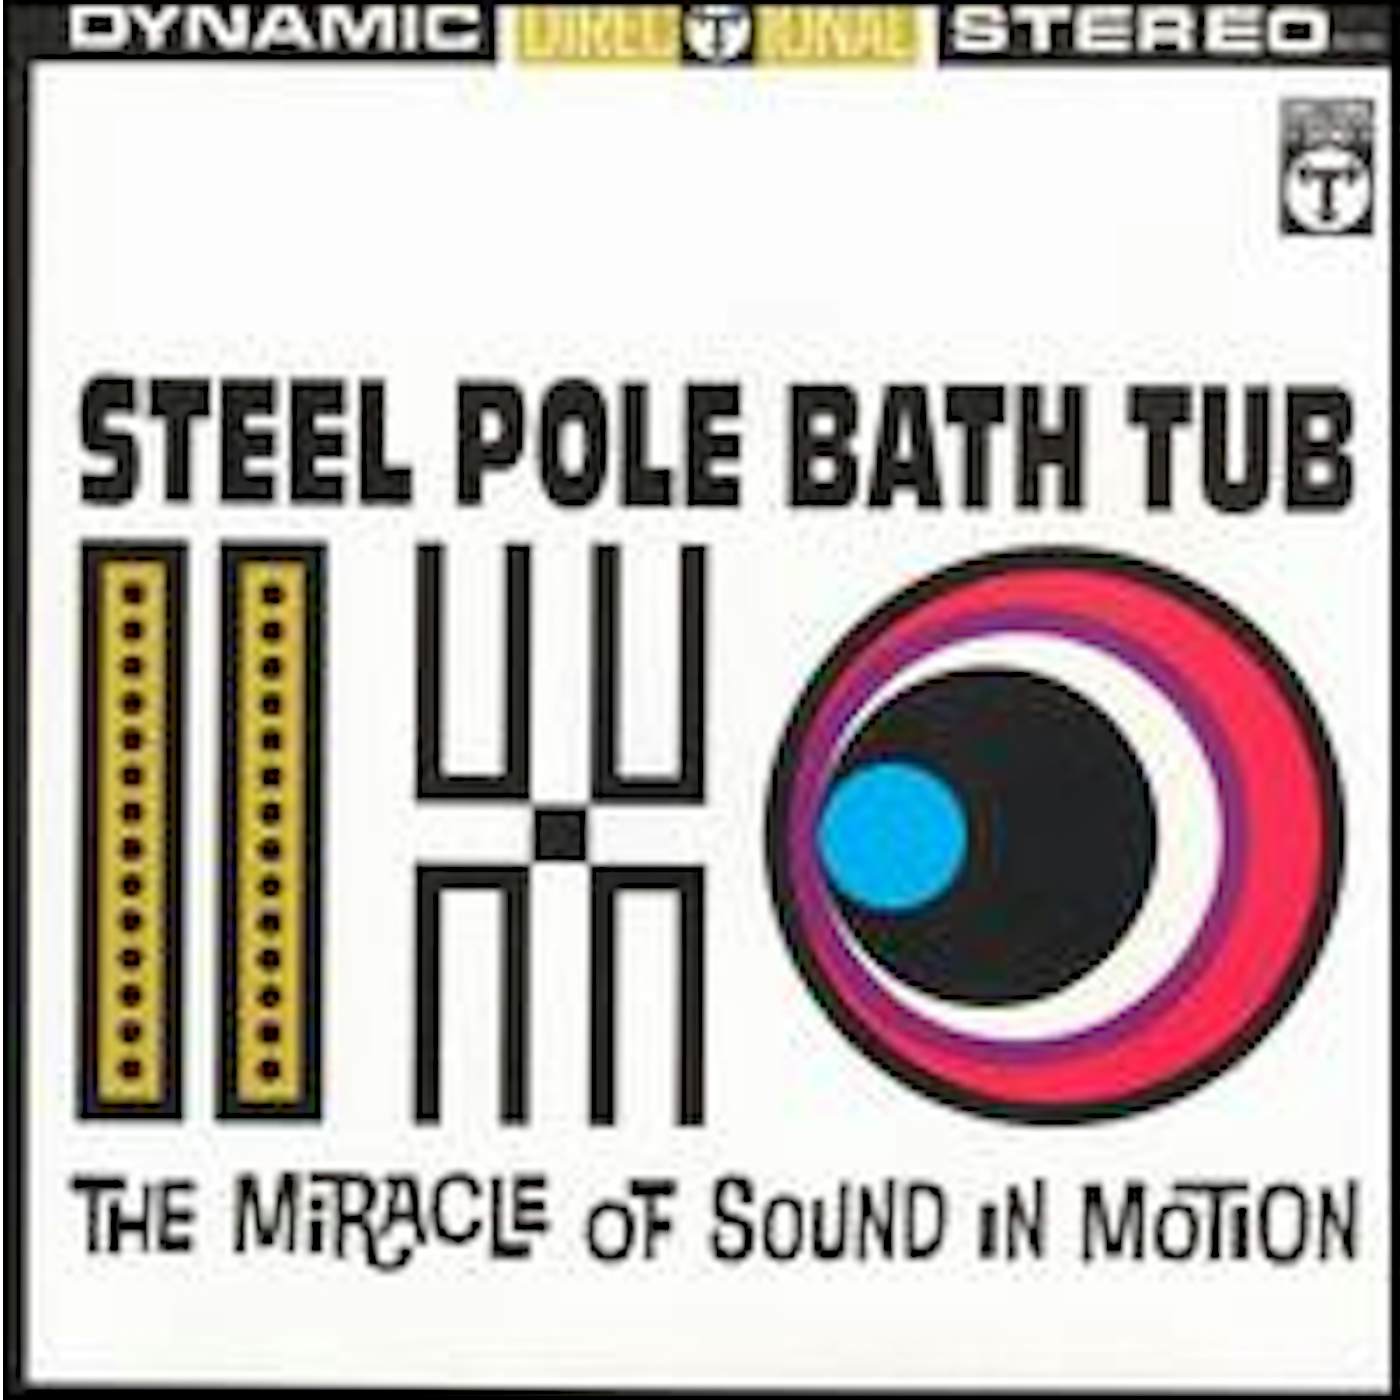 Steel Pole Bath Tub MIRACLE OF SOUND IN MOTION CD